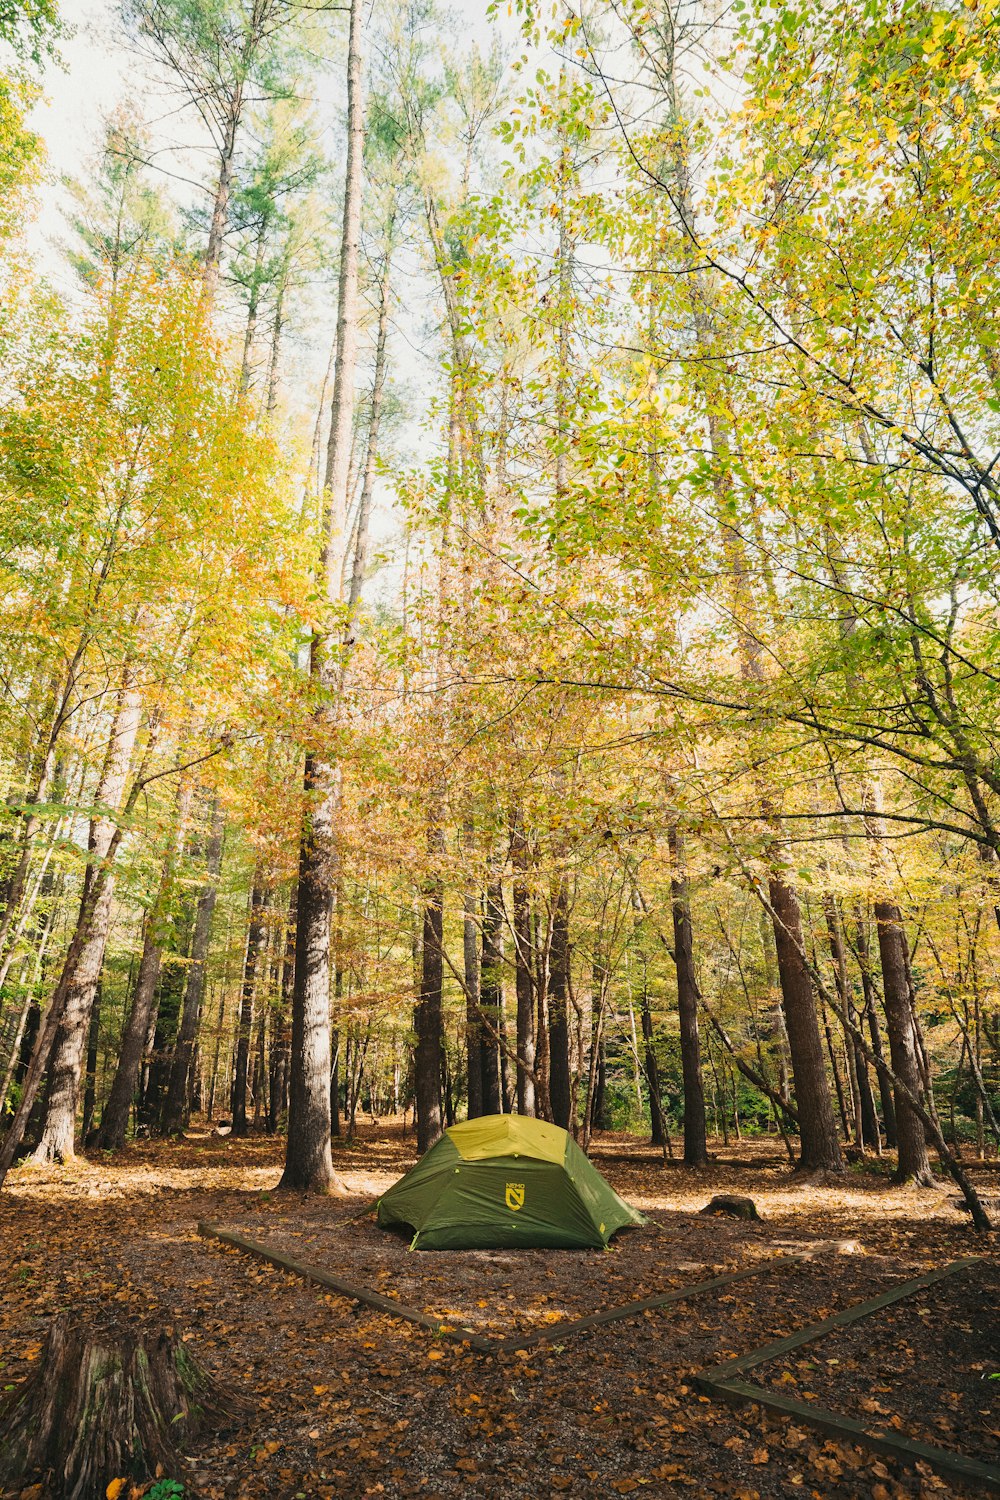 a tent pitched up in the middle of a forest